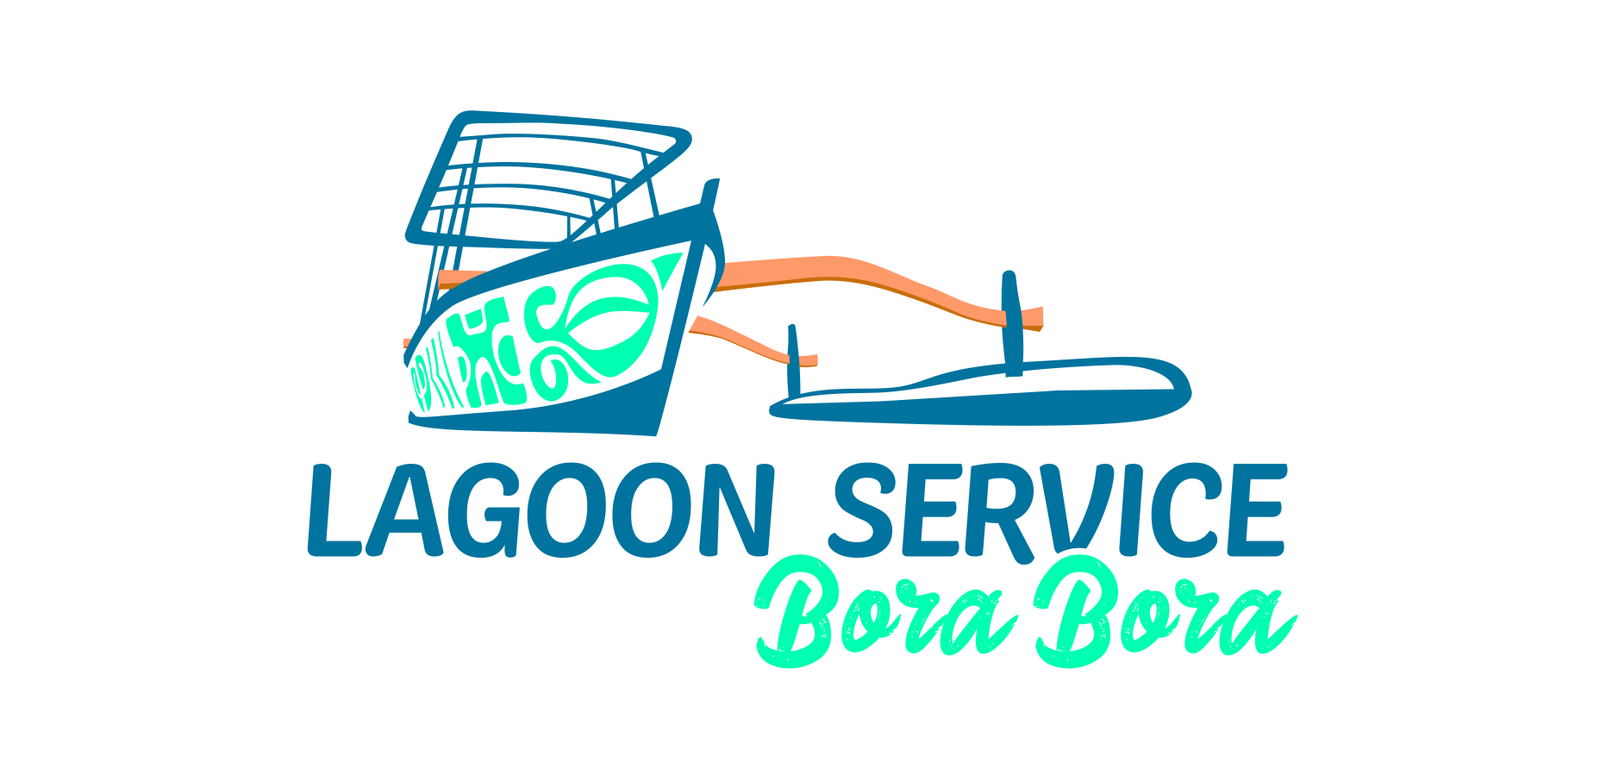 You are currently viewing Lagoon Service